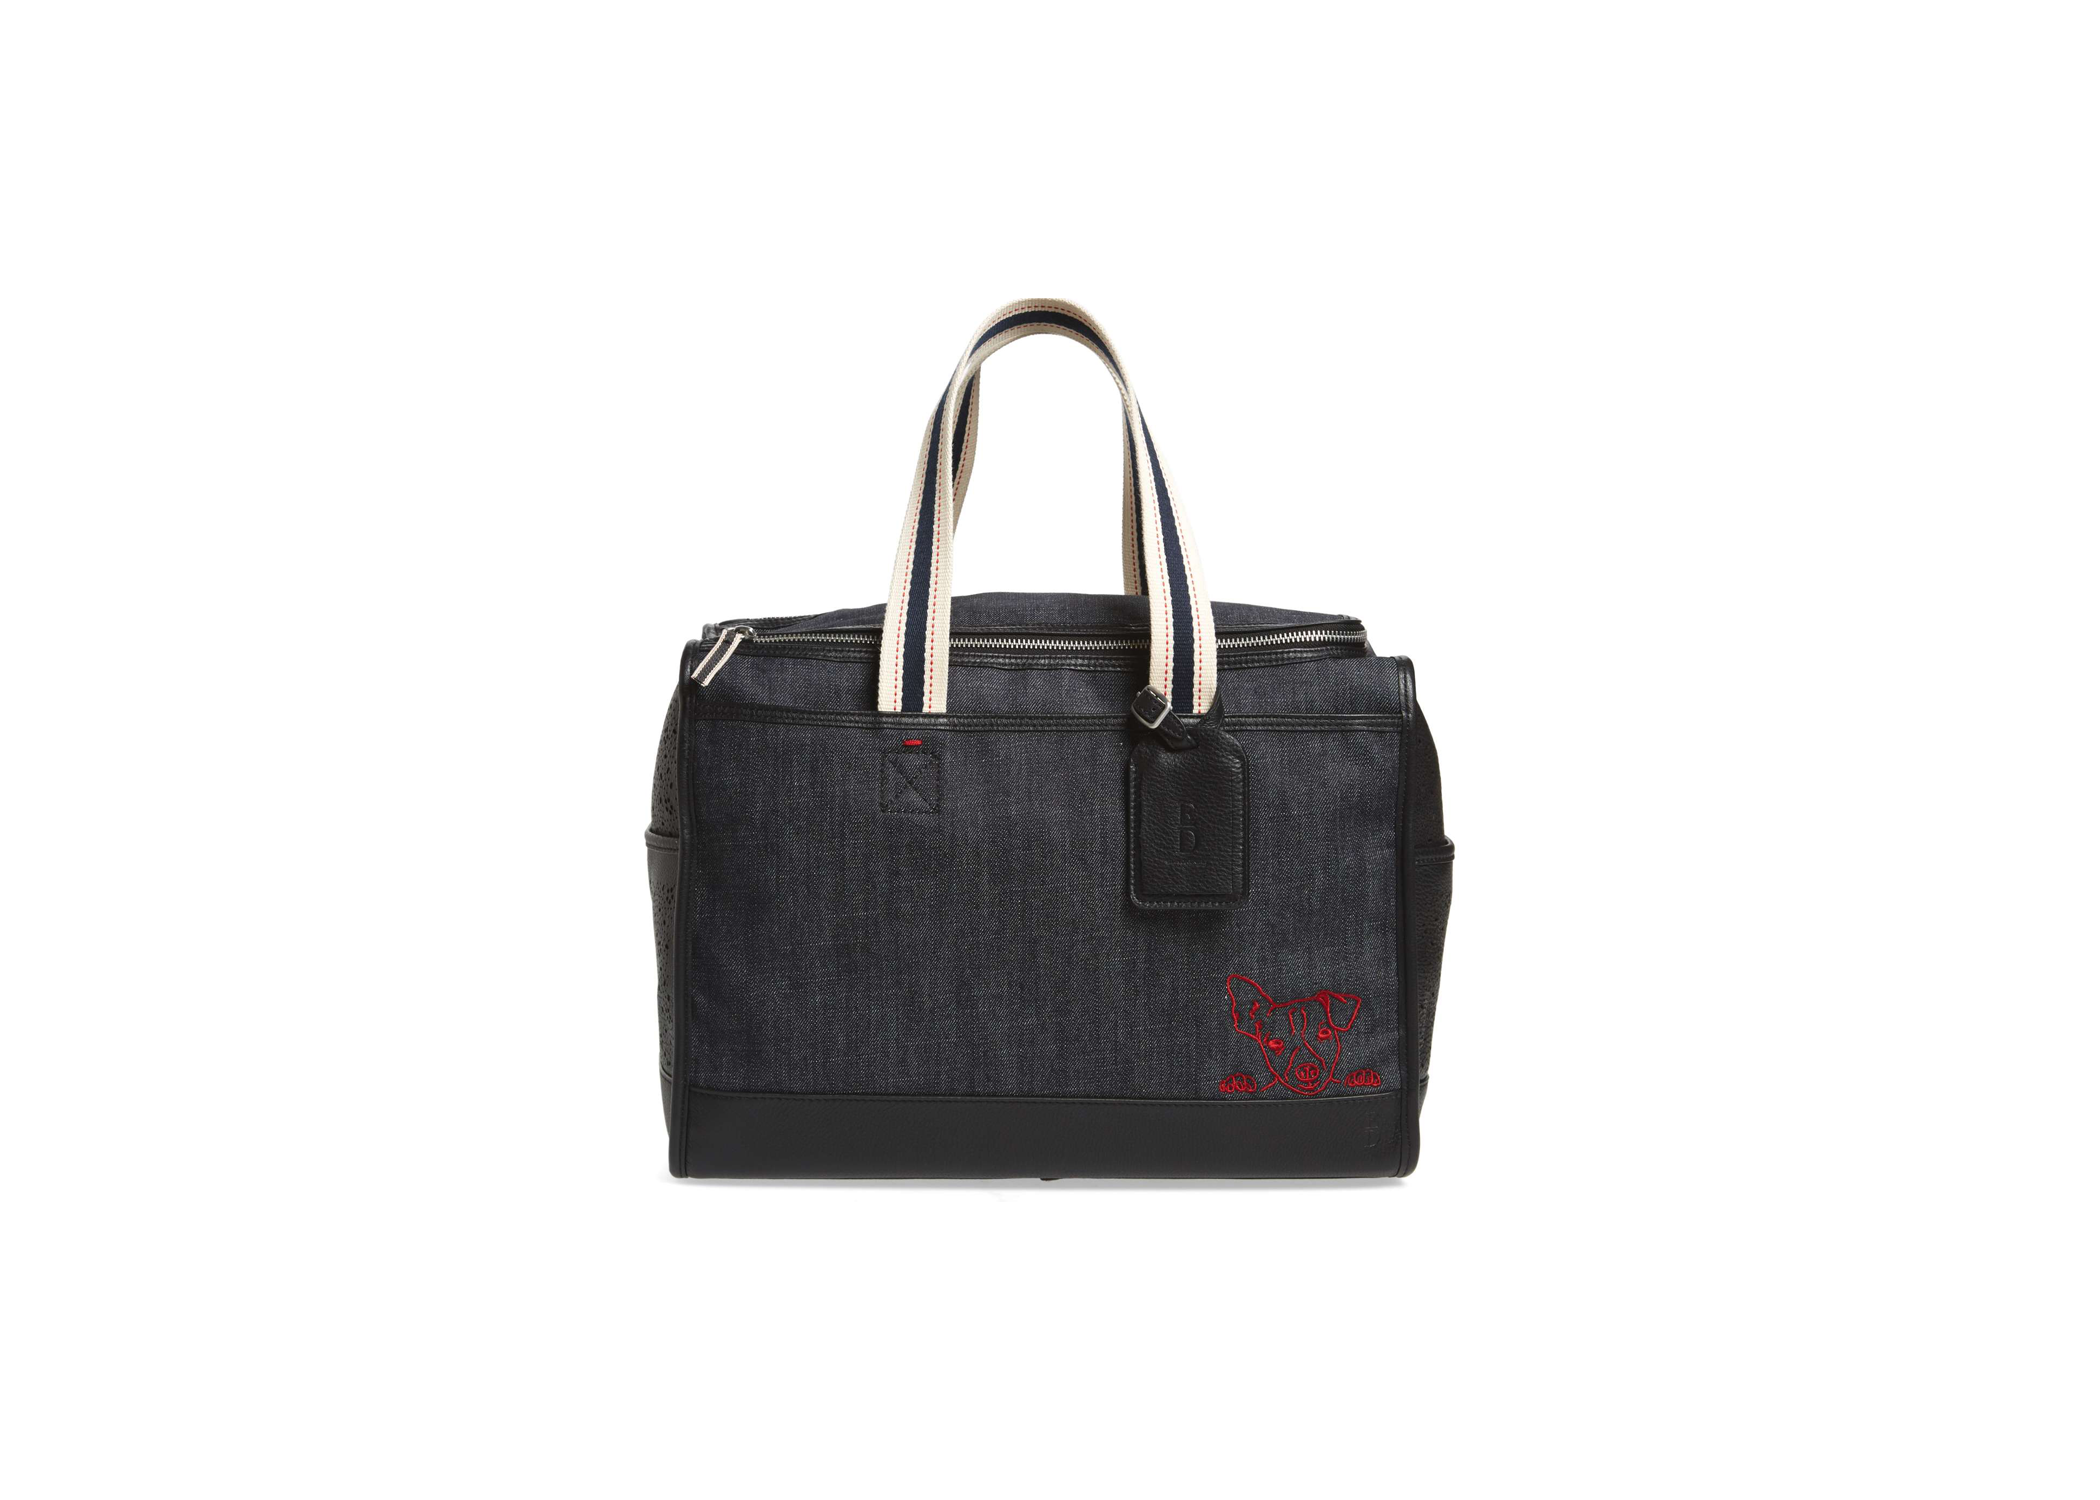   Augie Convertible Pet Tote  